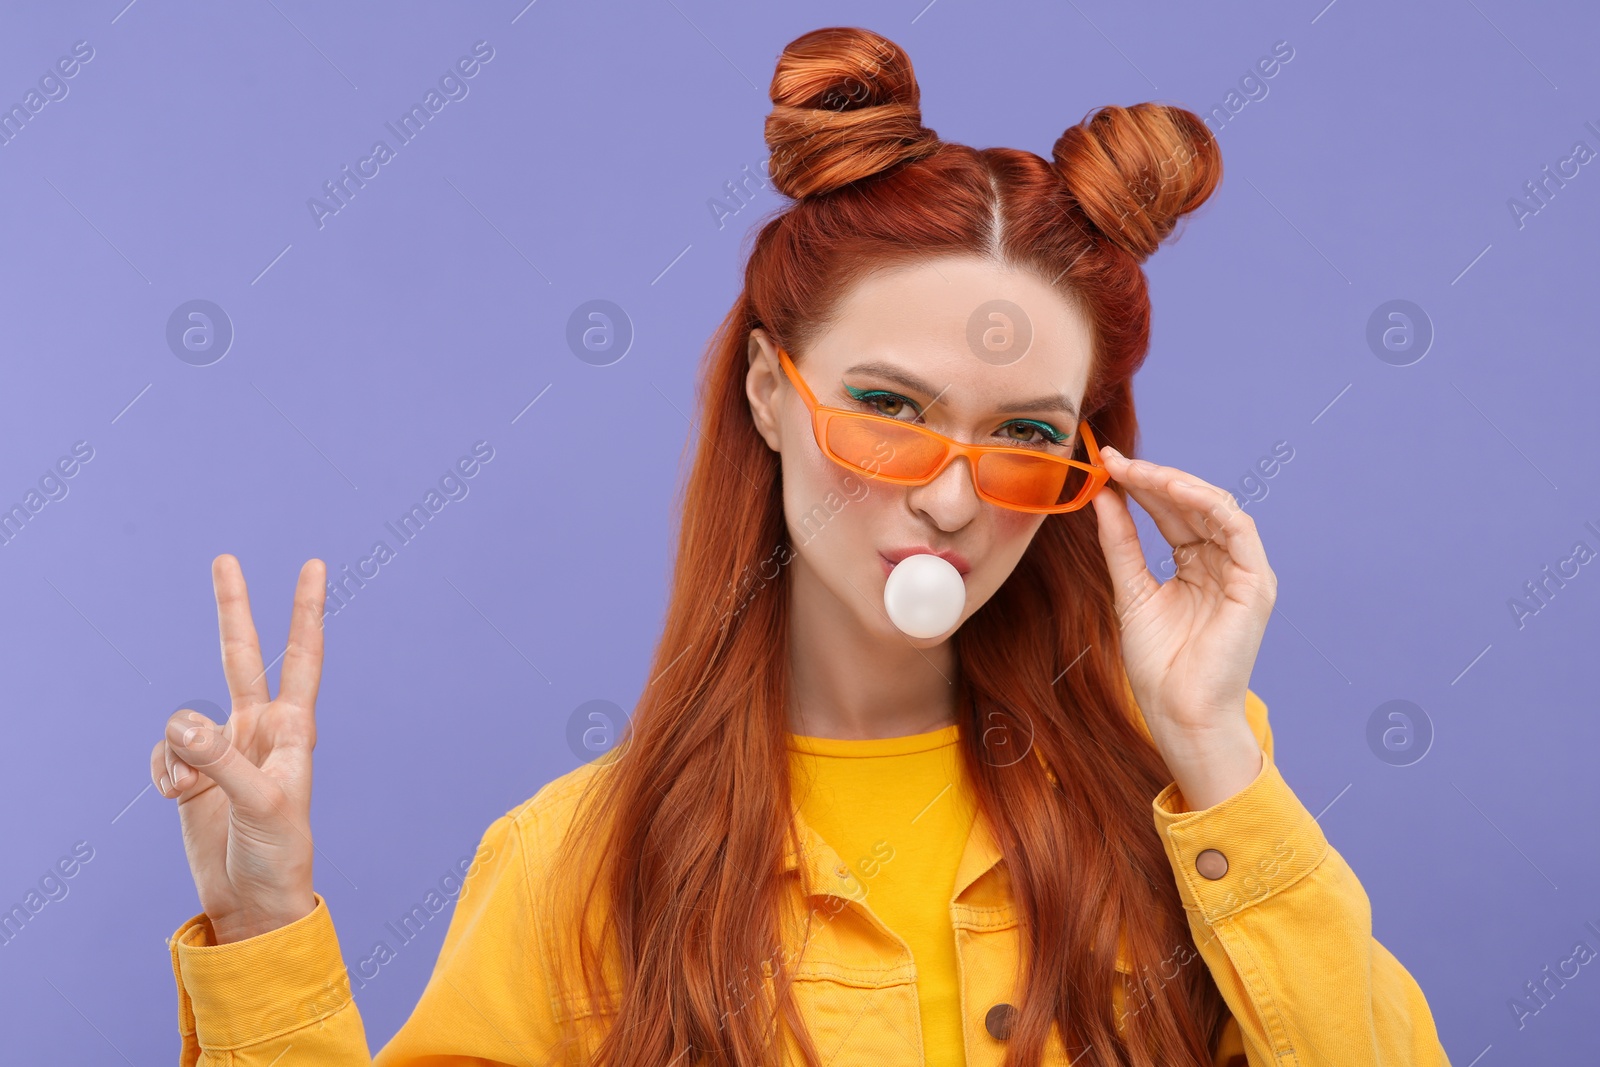 Photo of Portrait of beautiful woman in sunglasses blowing bubble gum and showing peace gesture on violet background